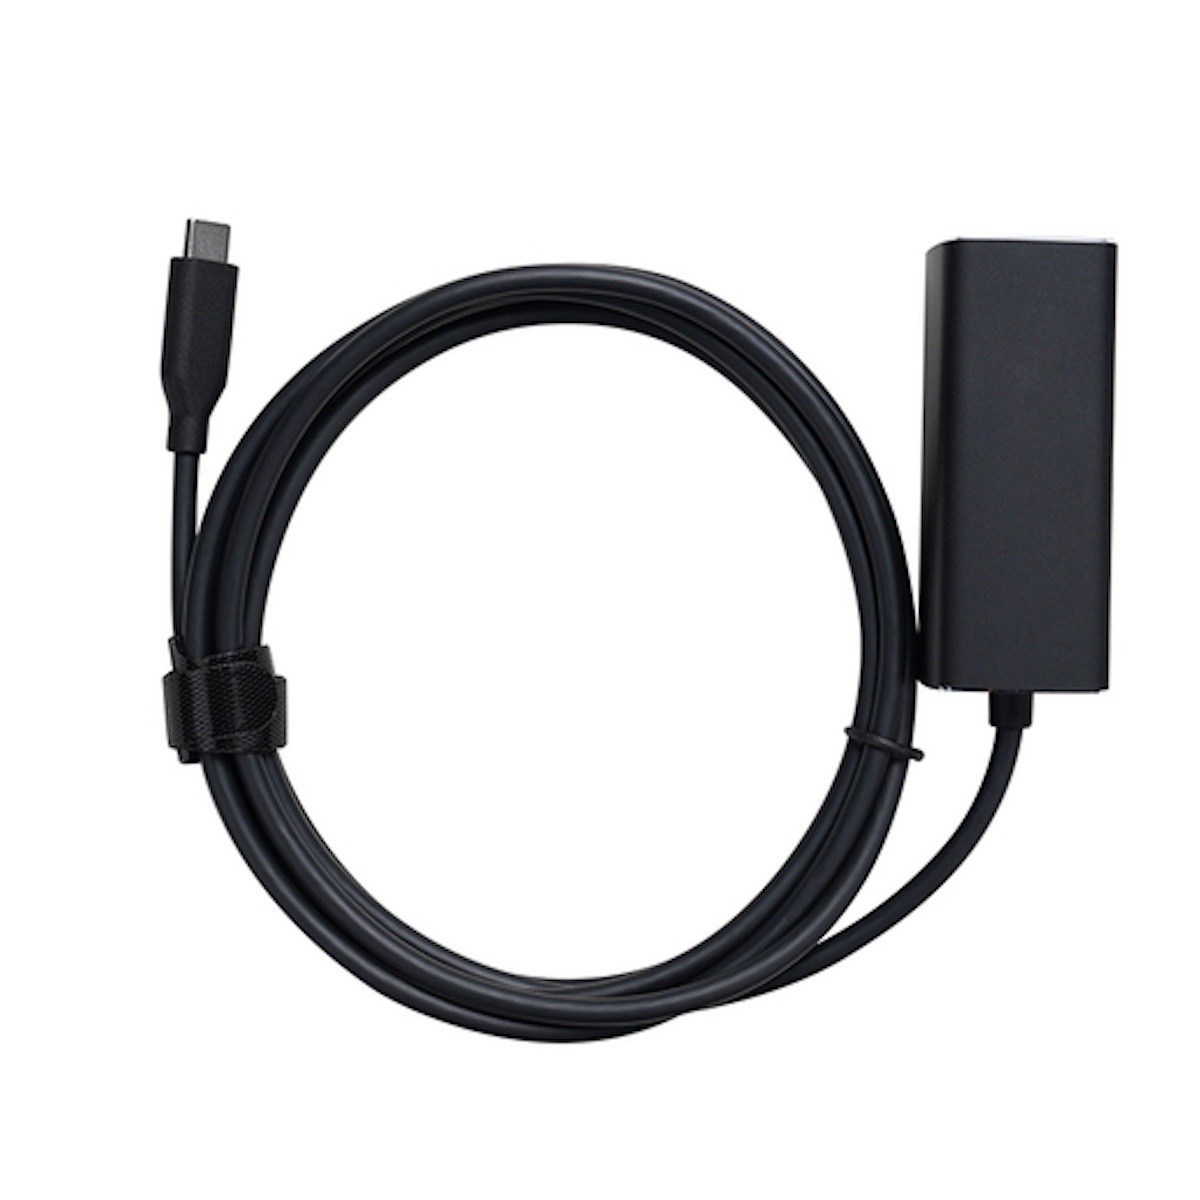 Obsbot Tail Air USB-C an Ethernet Adapter